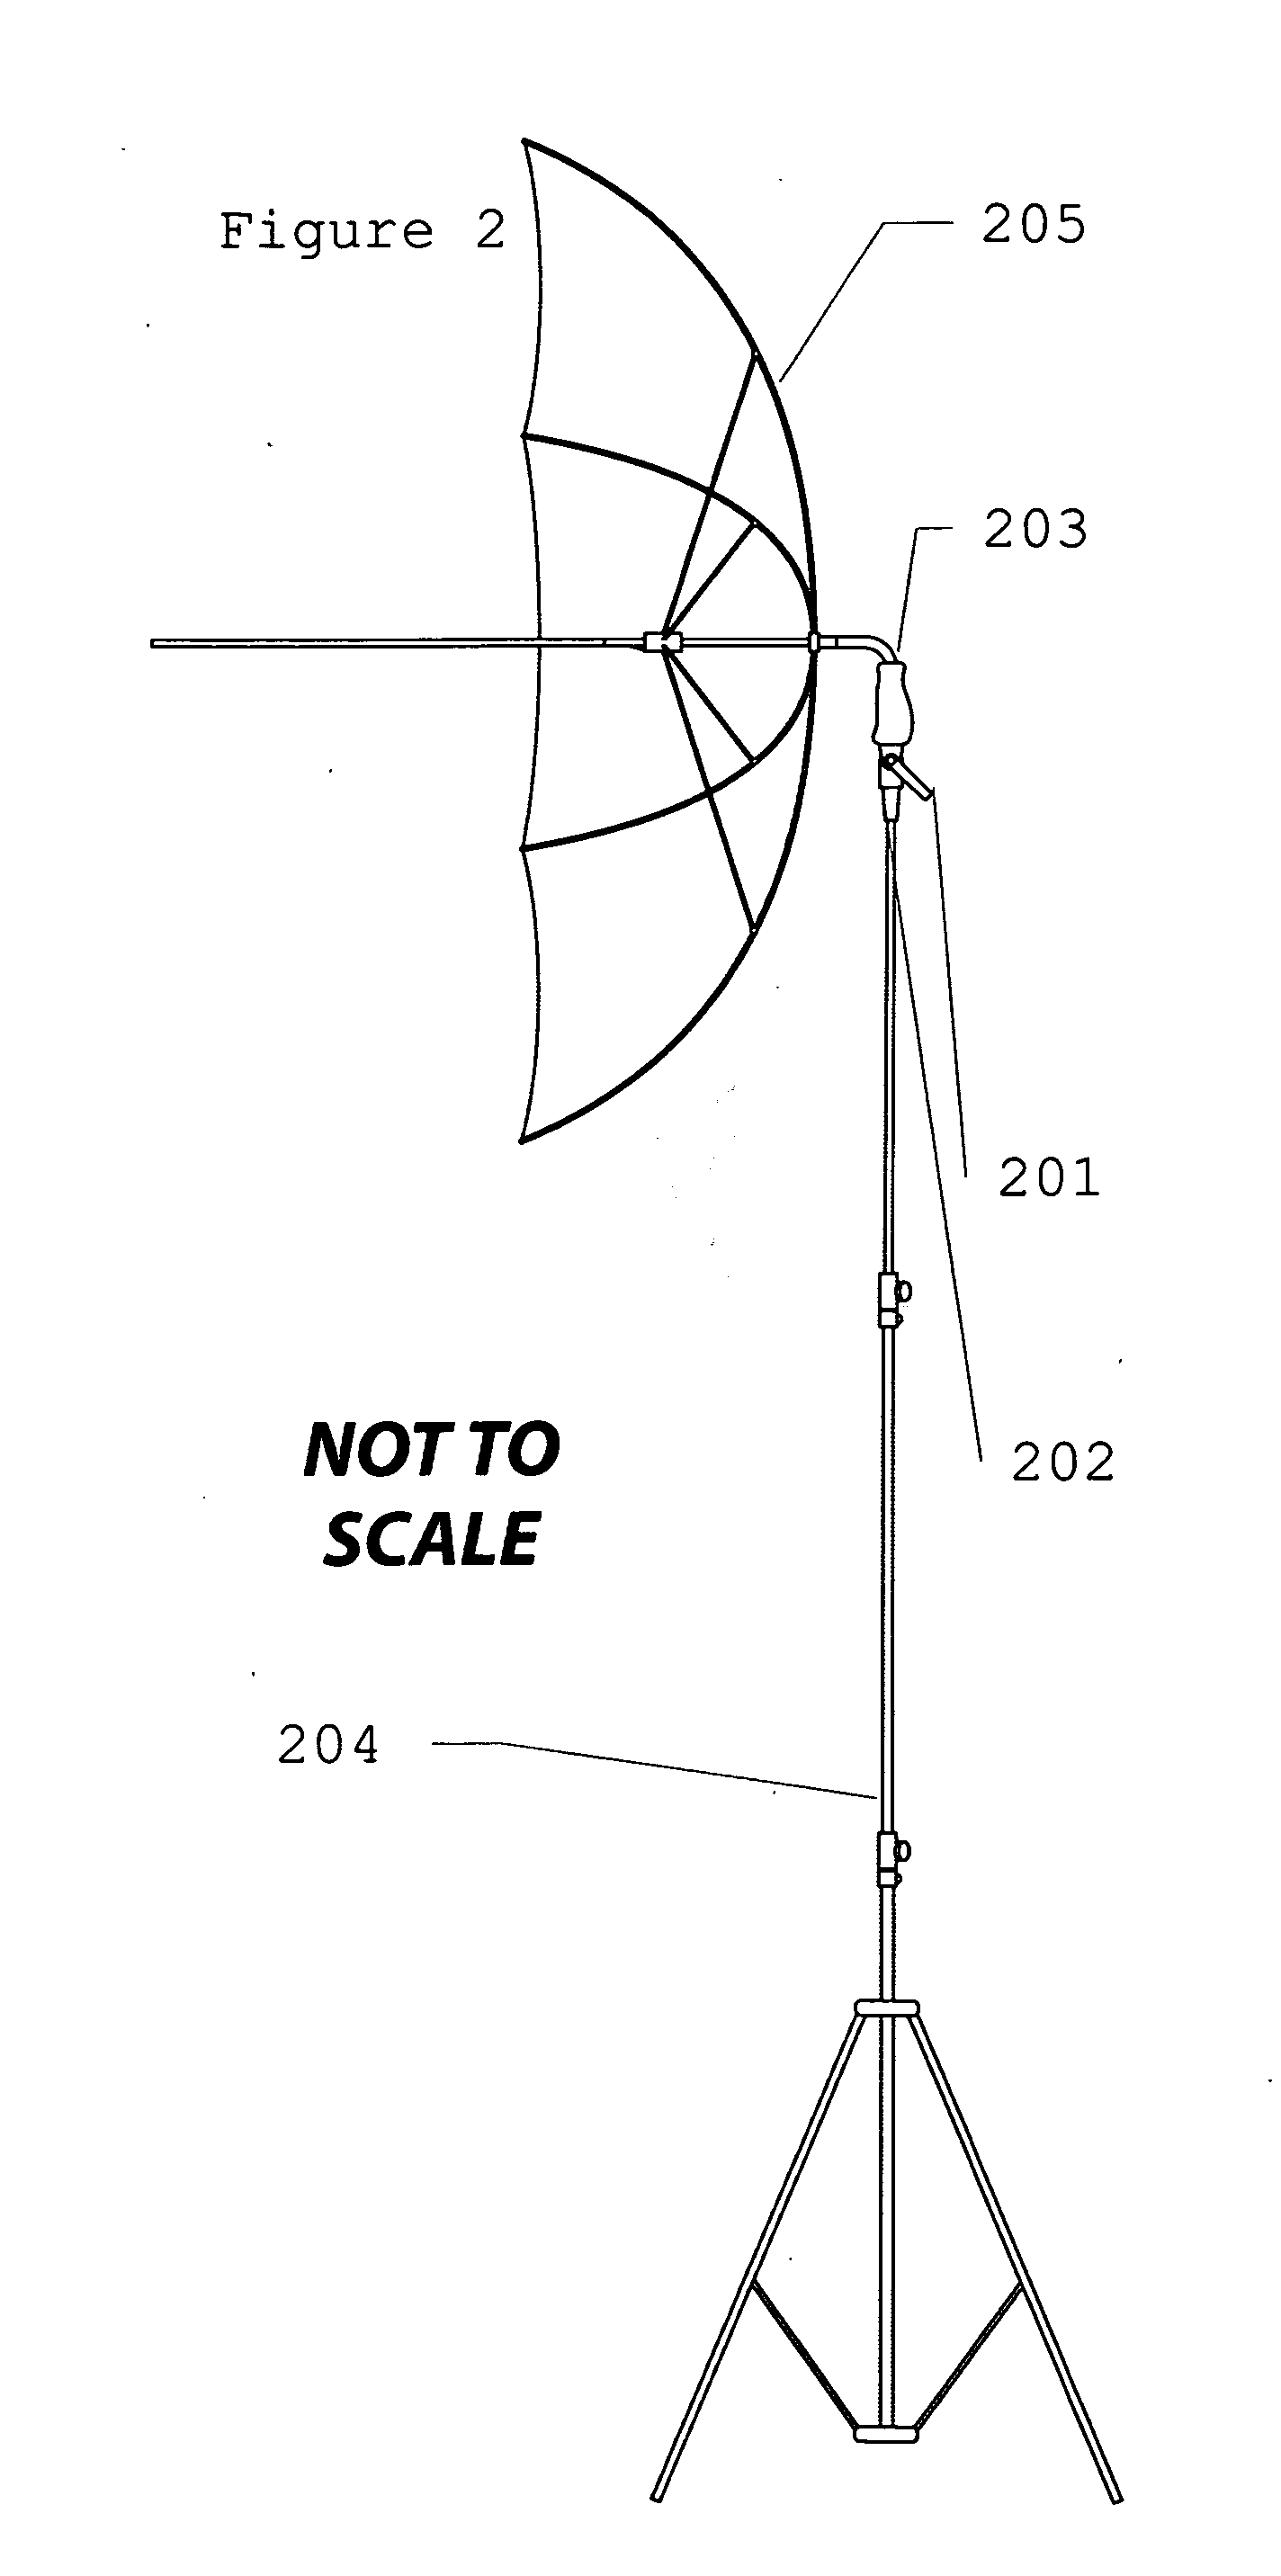 Apparatus to provide a multi-purpose reflective umbrella and lighting enhancement device for the purposes of providing illumination during still, motion, and video photography.